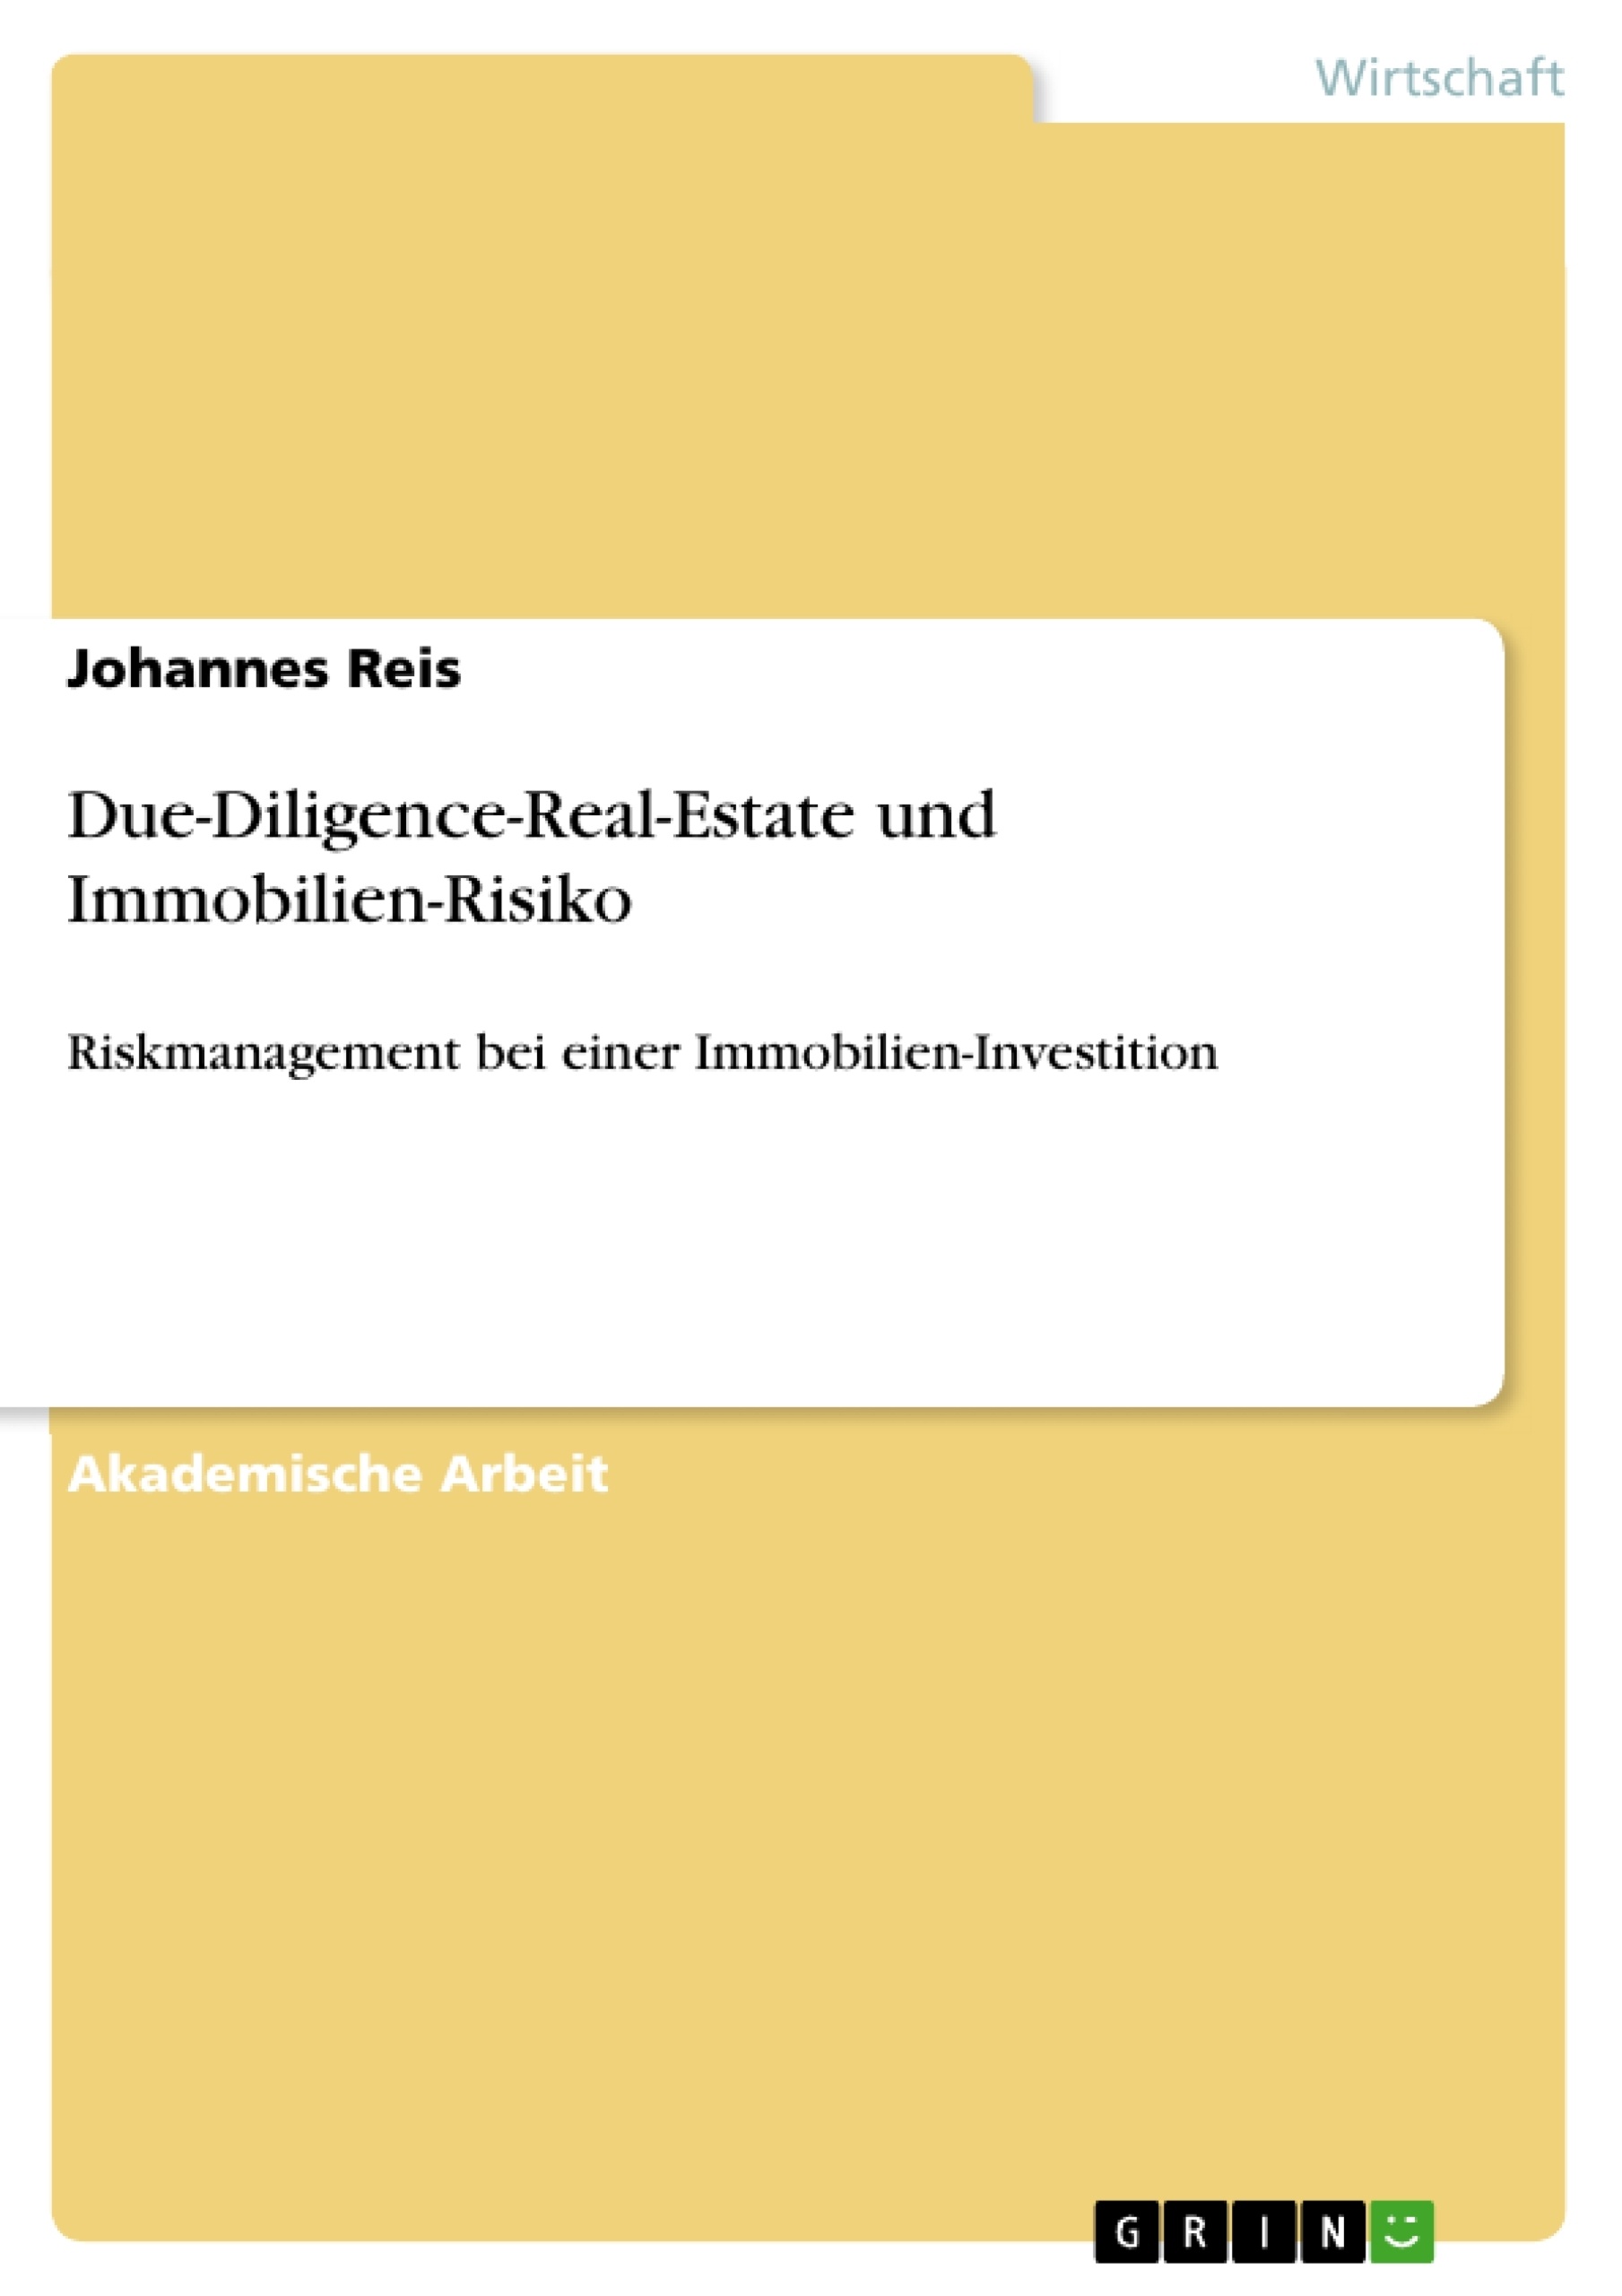 Título: Due-Diligence-Real-Estate und Immobilien-Risiko